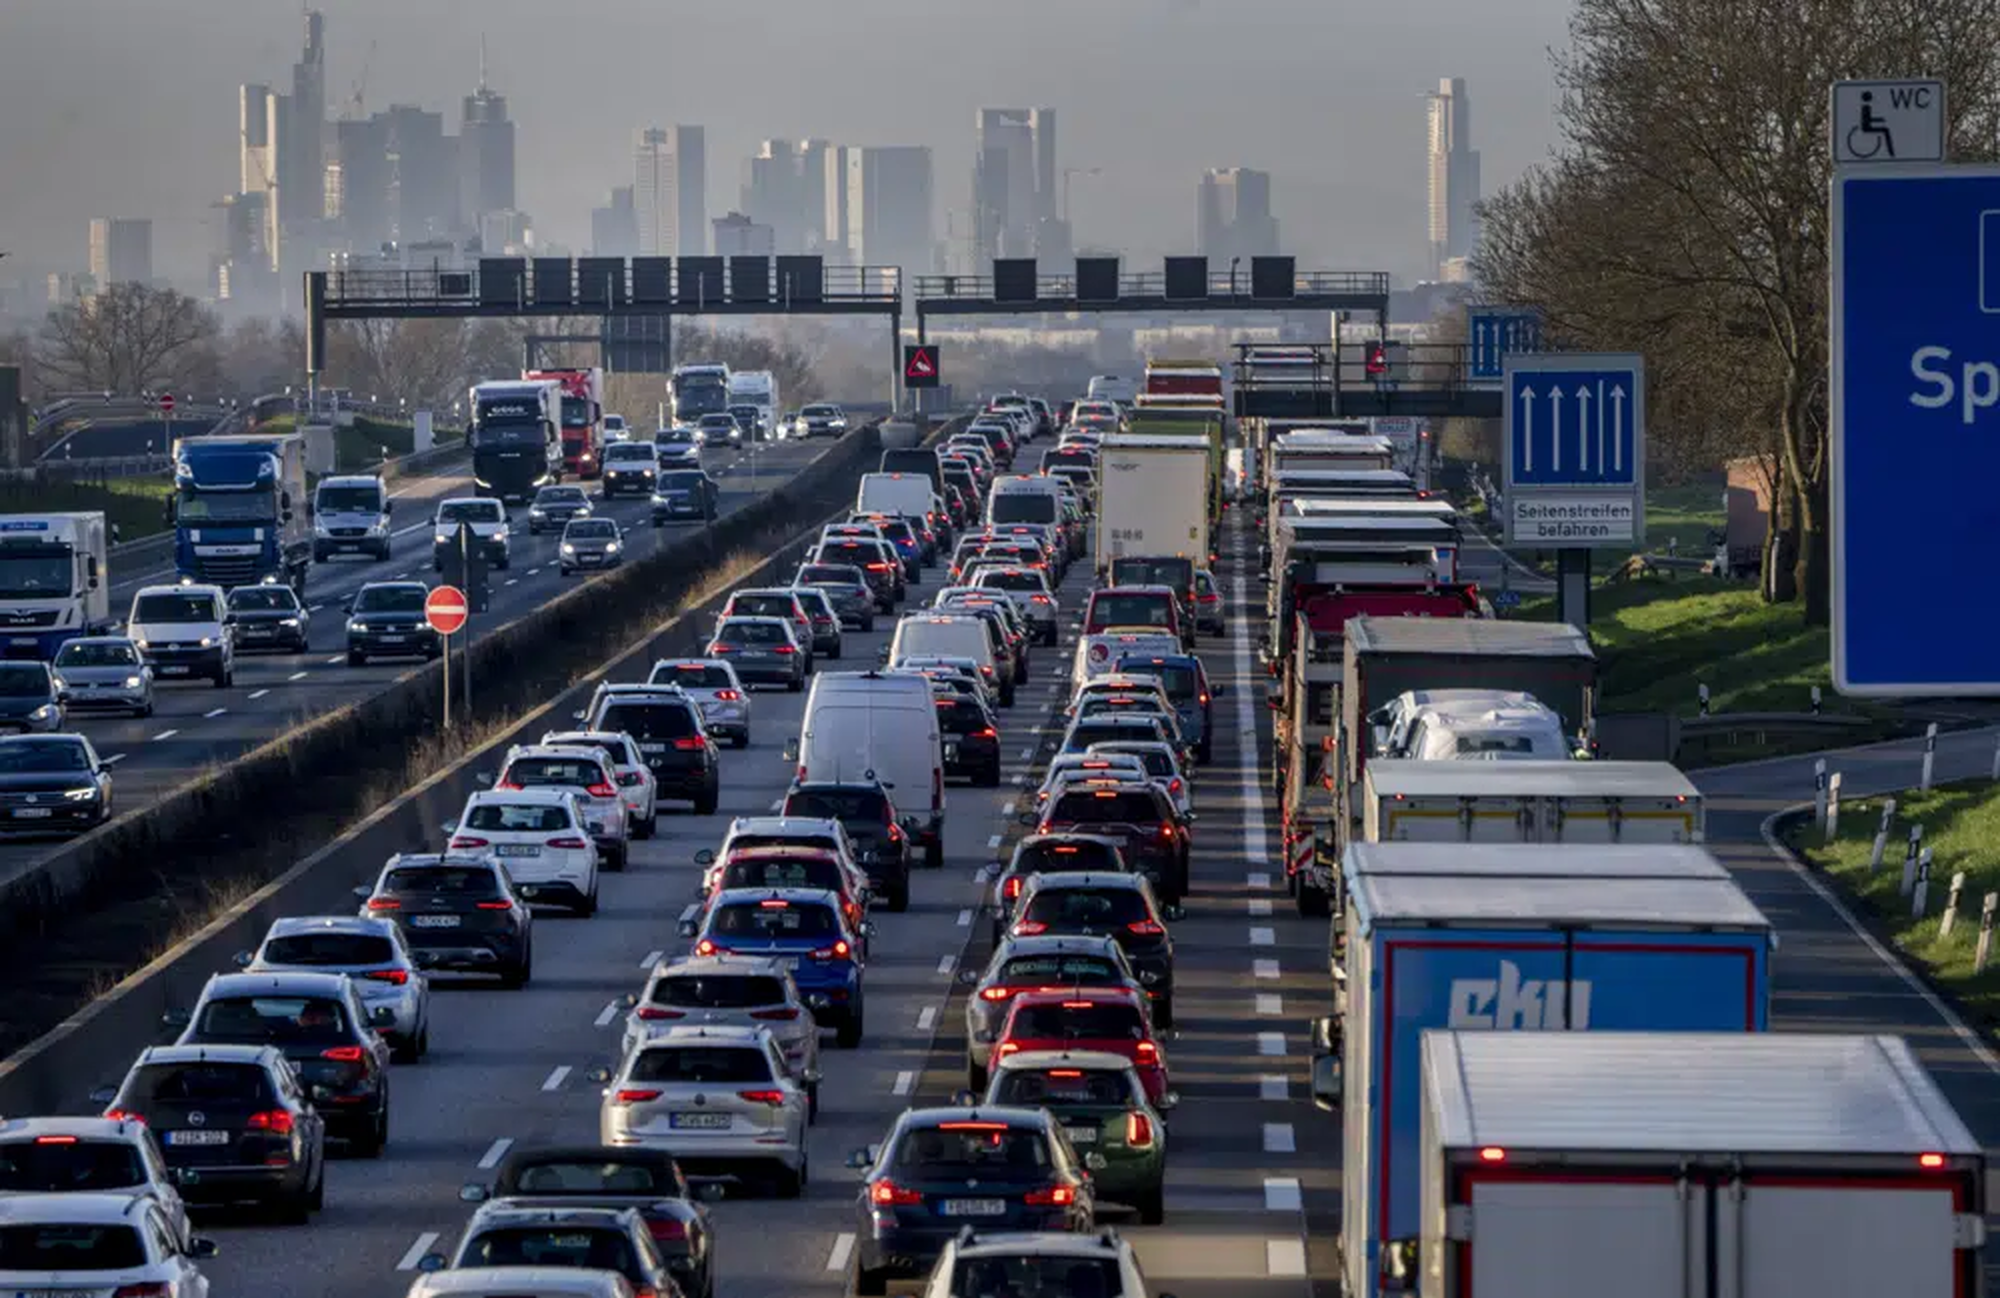 Cars and trucks queue in a traffic jam on a highway near Frankfurt, Germany, 28 March 2023. Photo: Michael Probst / AP Photo